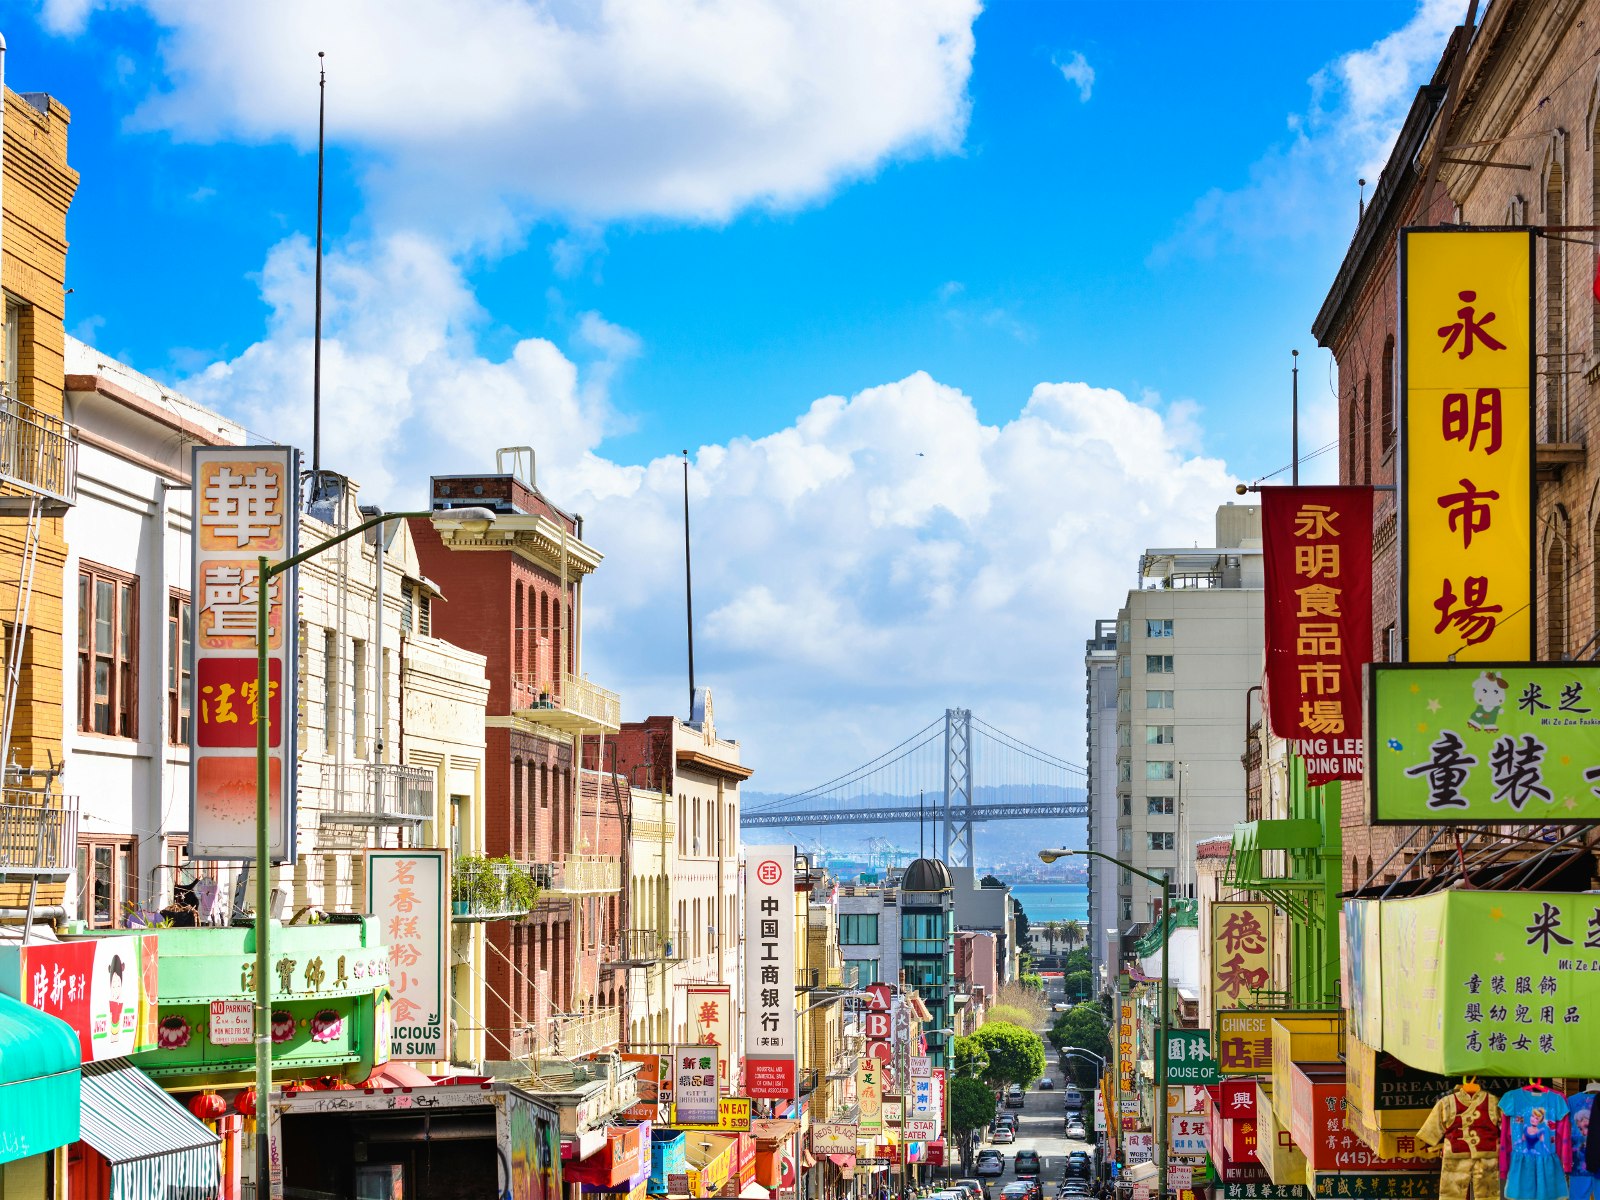 Work up an appetite walking San Francisco's hilly streets, before indulging in dumplings galore in the city's Chinatown © Sean Pavone / Shutterstock